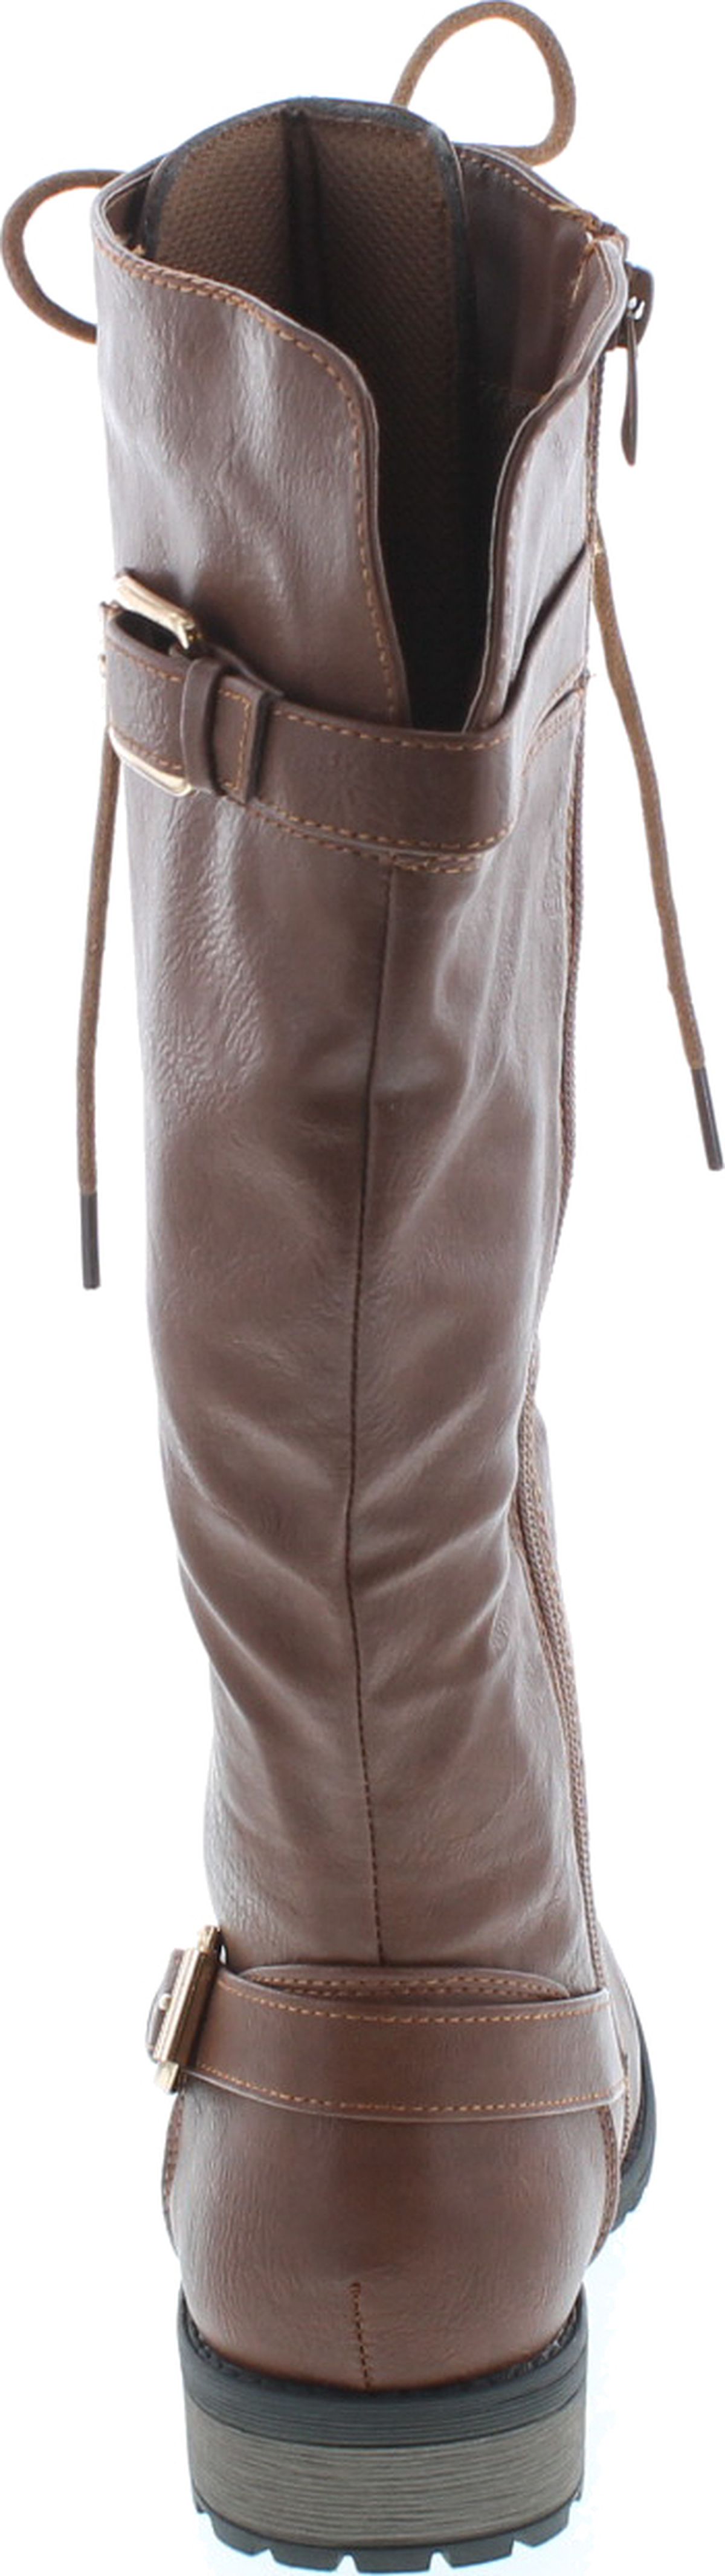 Forever Link Mango 27 Womens Knee High Buckle Riding Boots